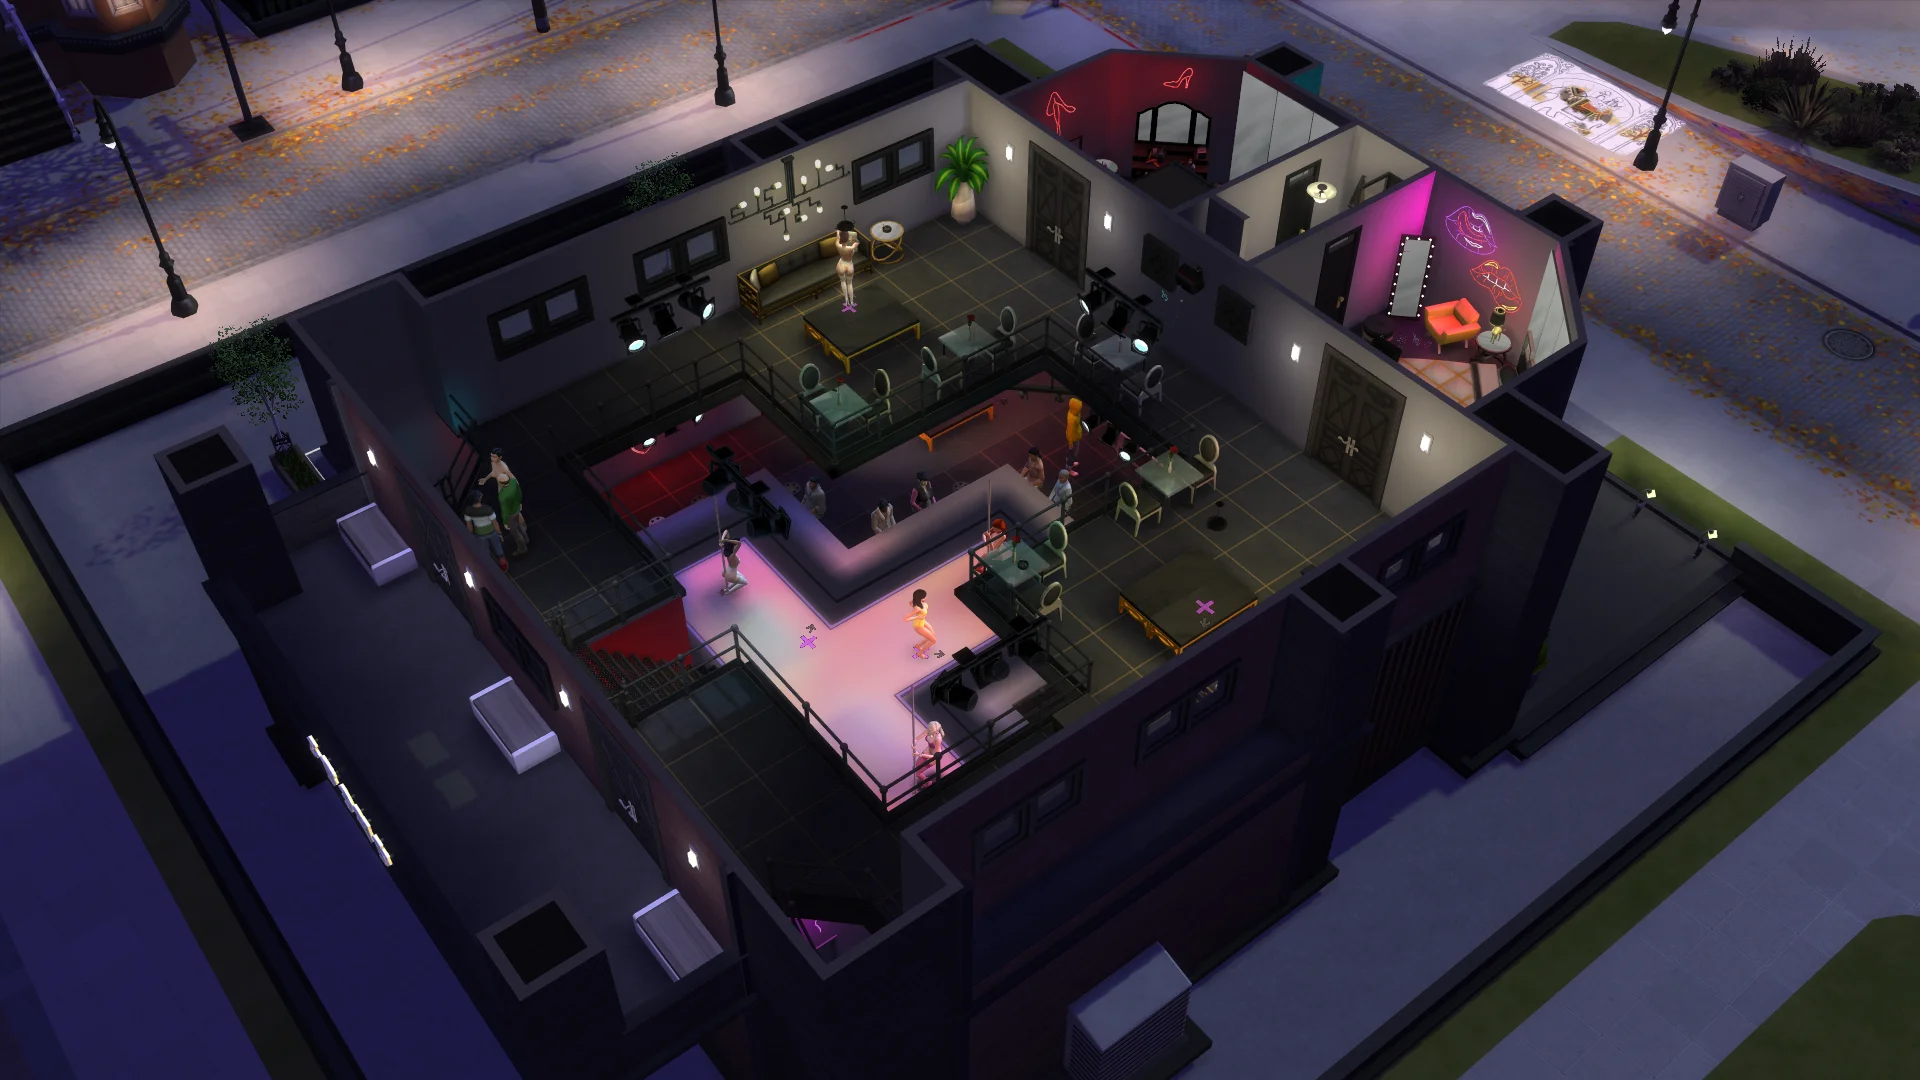 The sims 4 strip club lot second floor